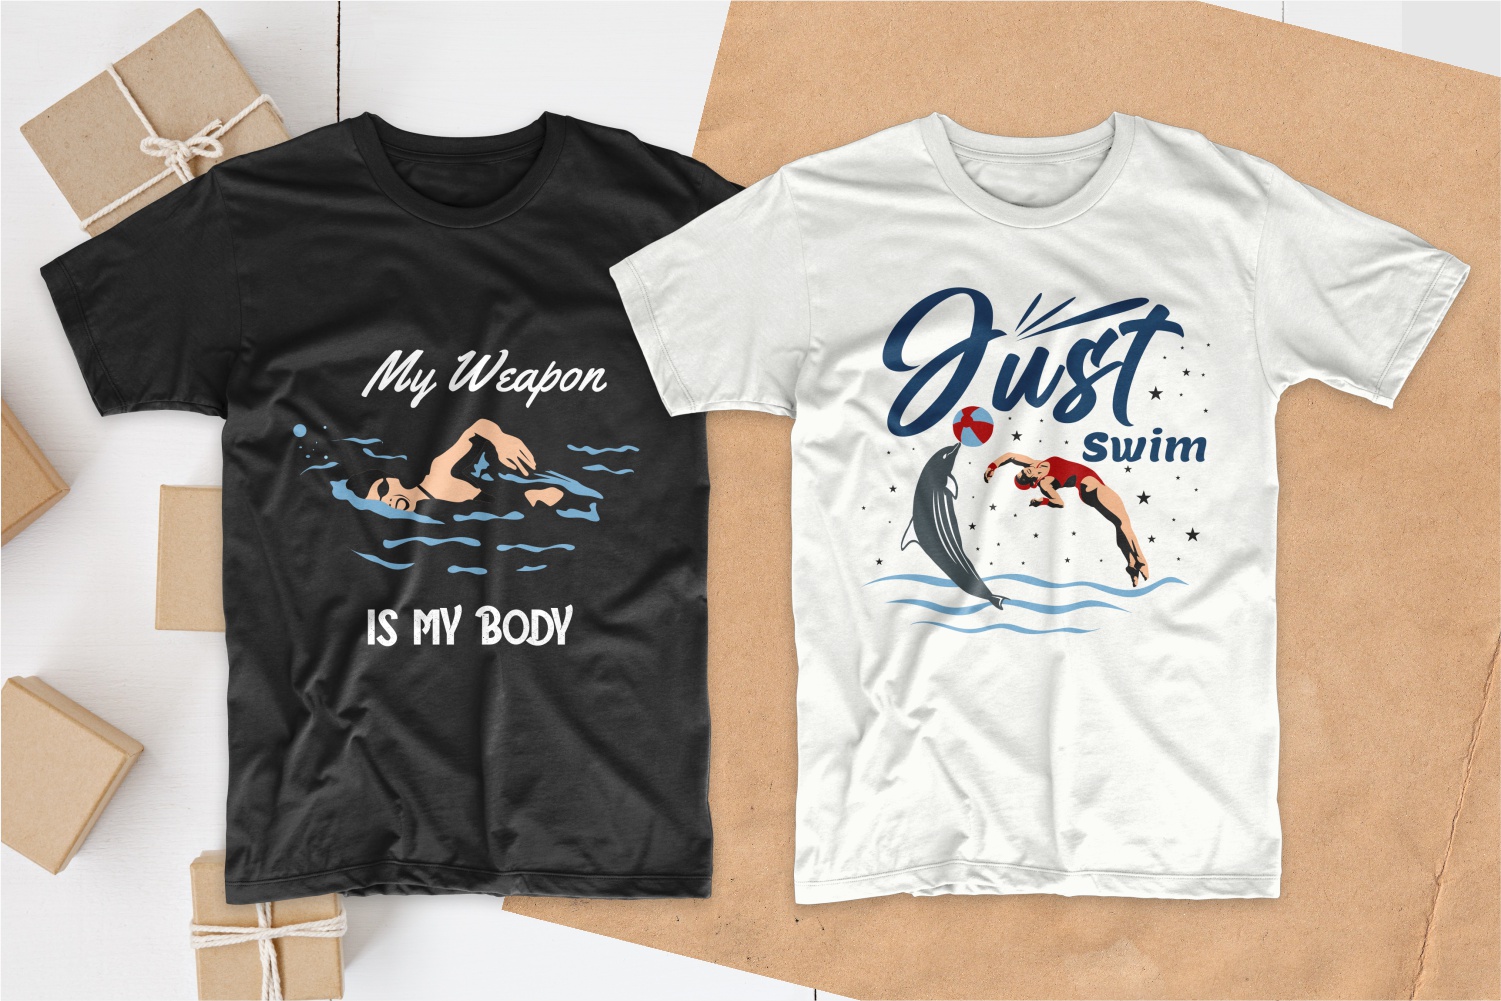 Black and white T-shirts with professional swimmers.